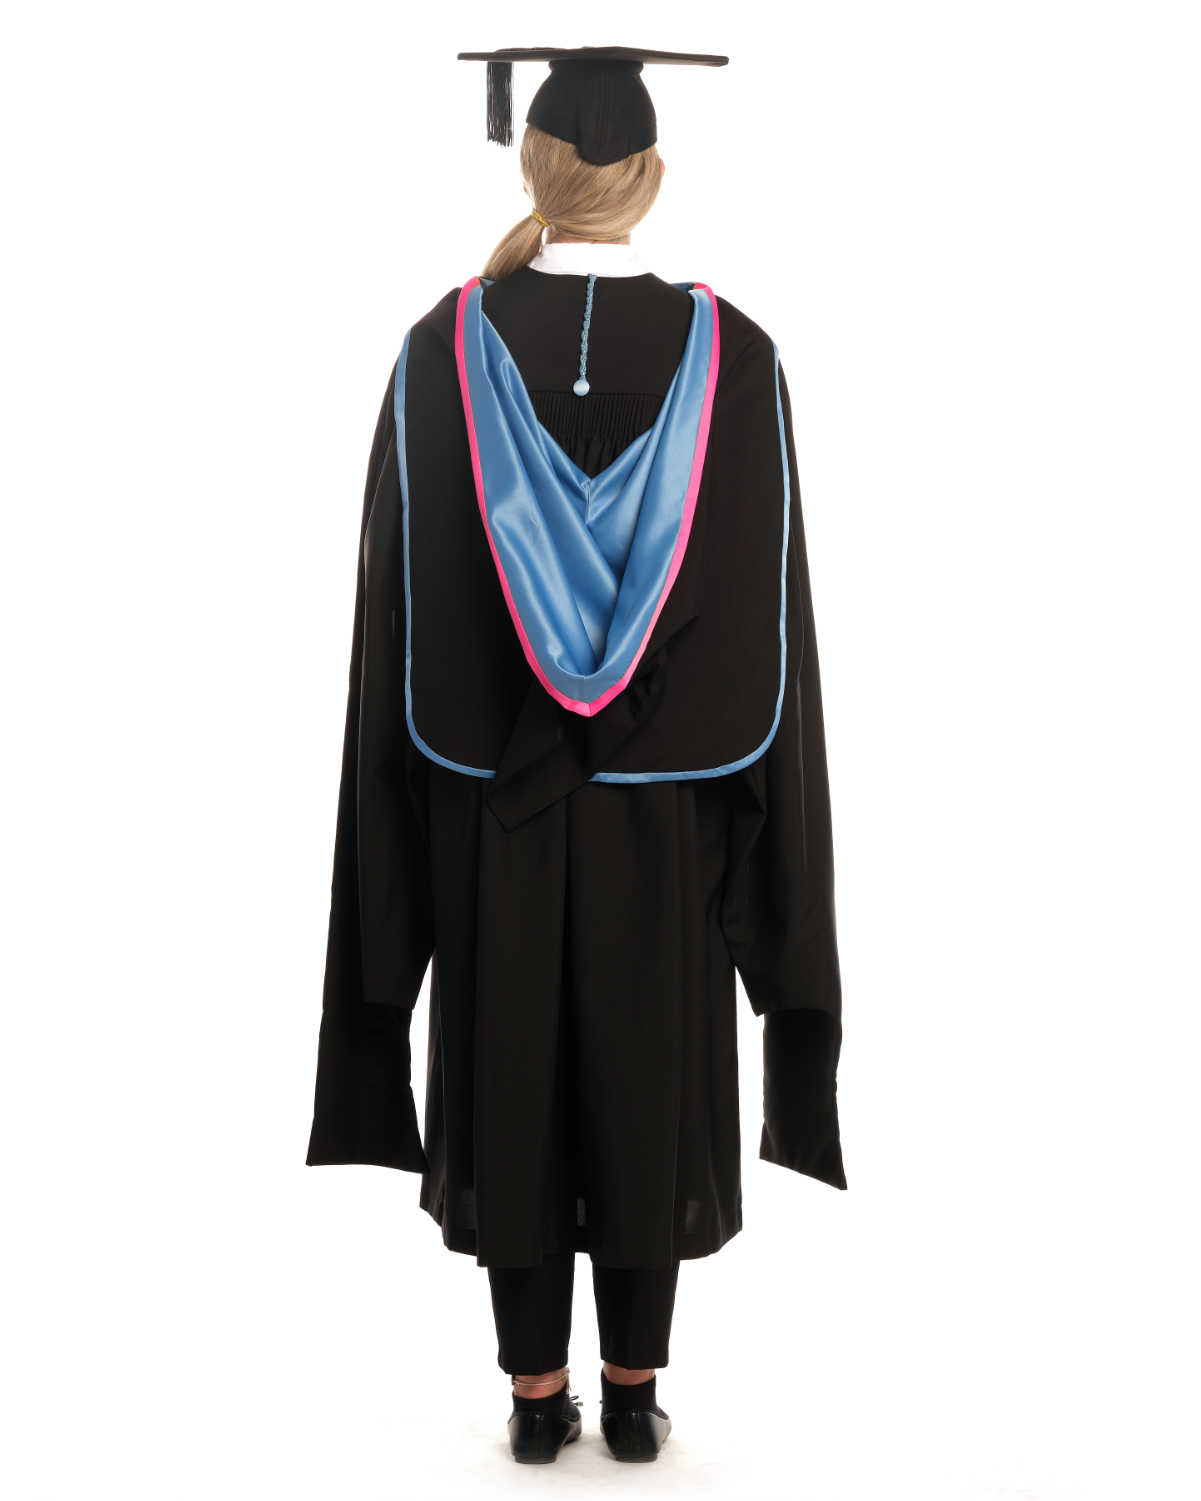 University of Southampton | MA | Master of Arts Gown, Cap and Hood Set